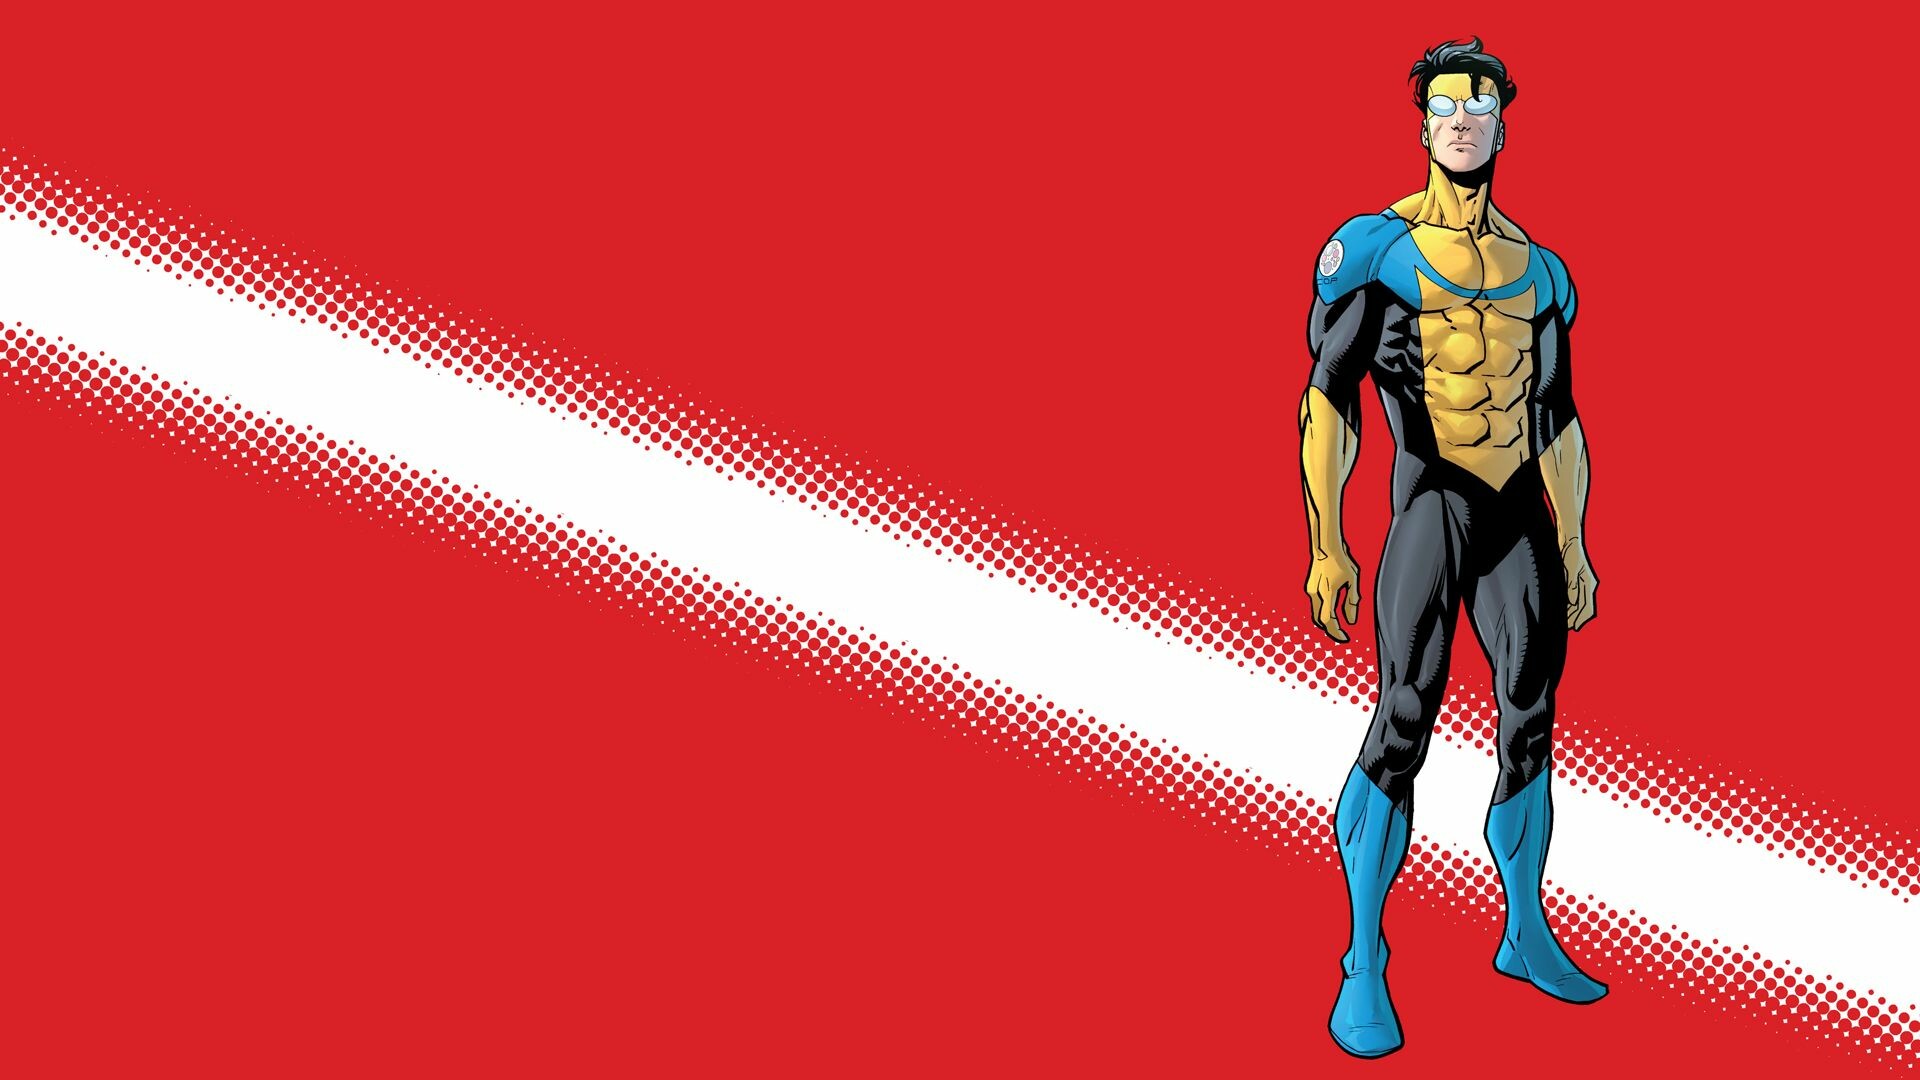 Invincible, Top free wallpapers, Captivating backgrounds, Heroic imagery, 1920x1080 Full HD Desktop